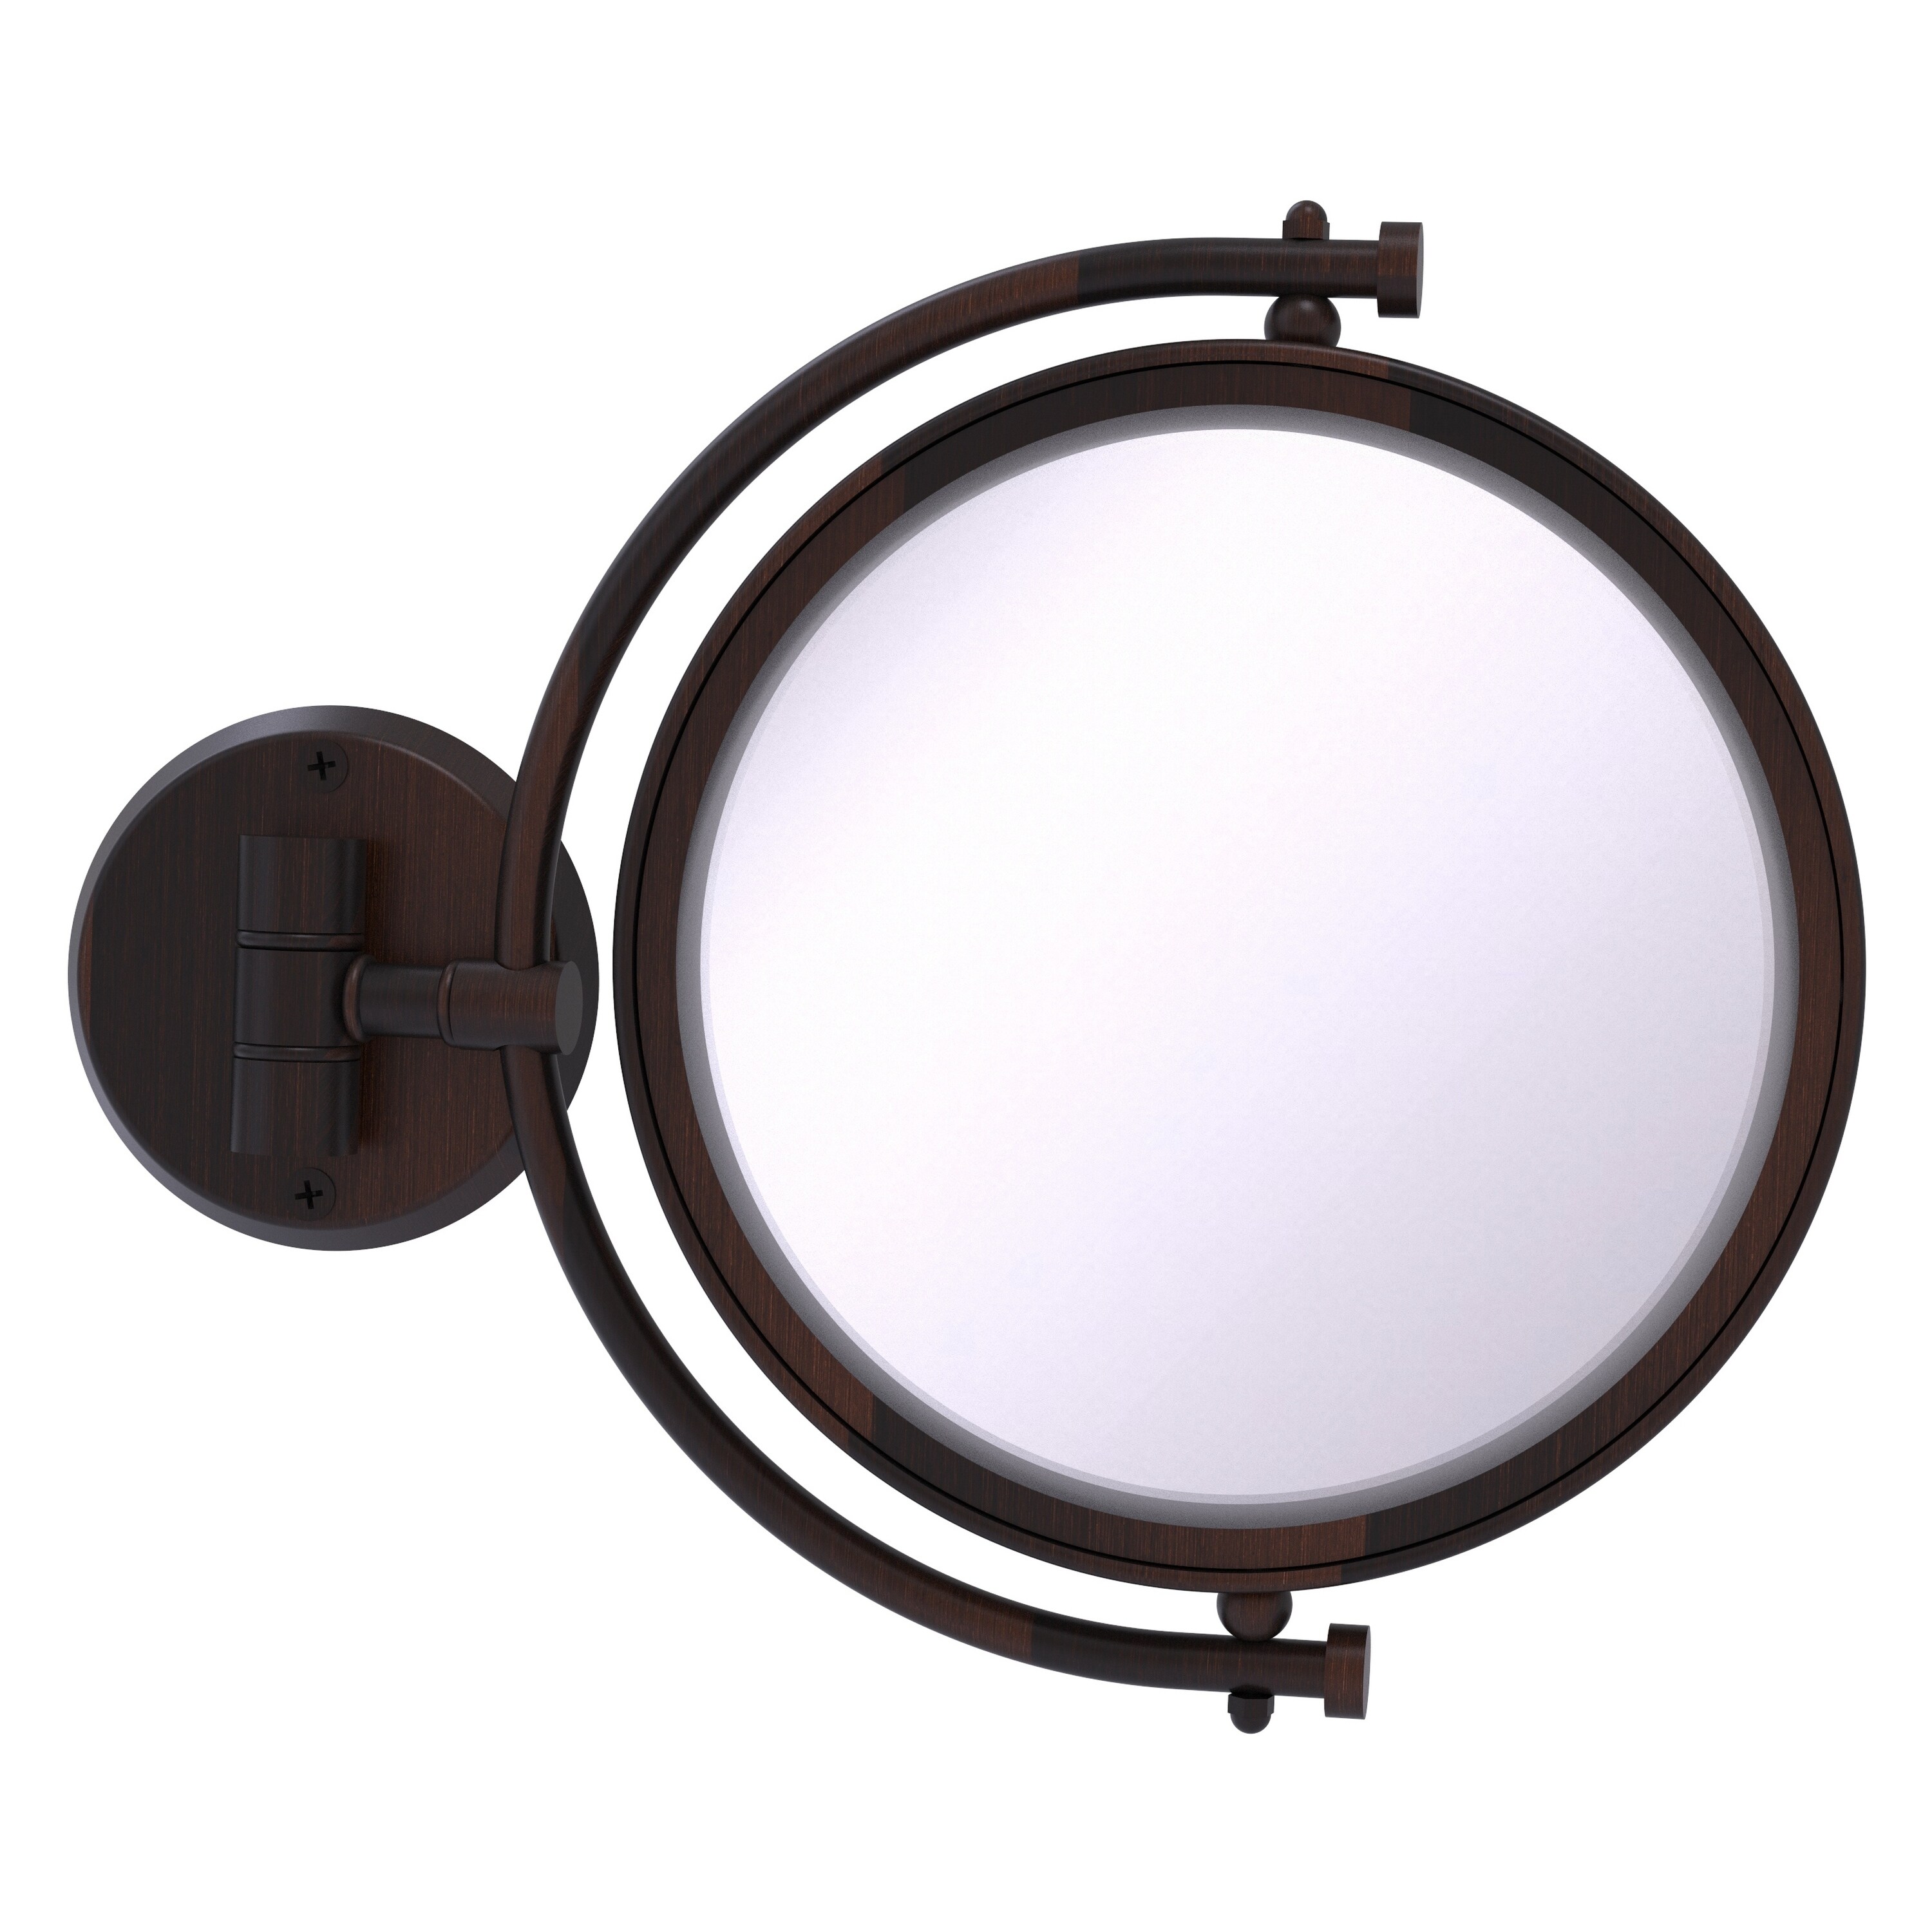 8-in x 10-in Distressed Bronze Double-sided 2X Magnifying Wall-mounted Vanity Mirror | - Allied Brass WM-4/2X-VB